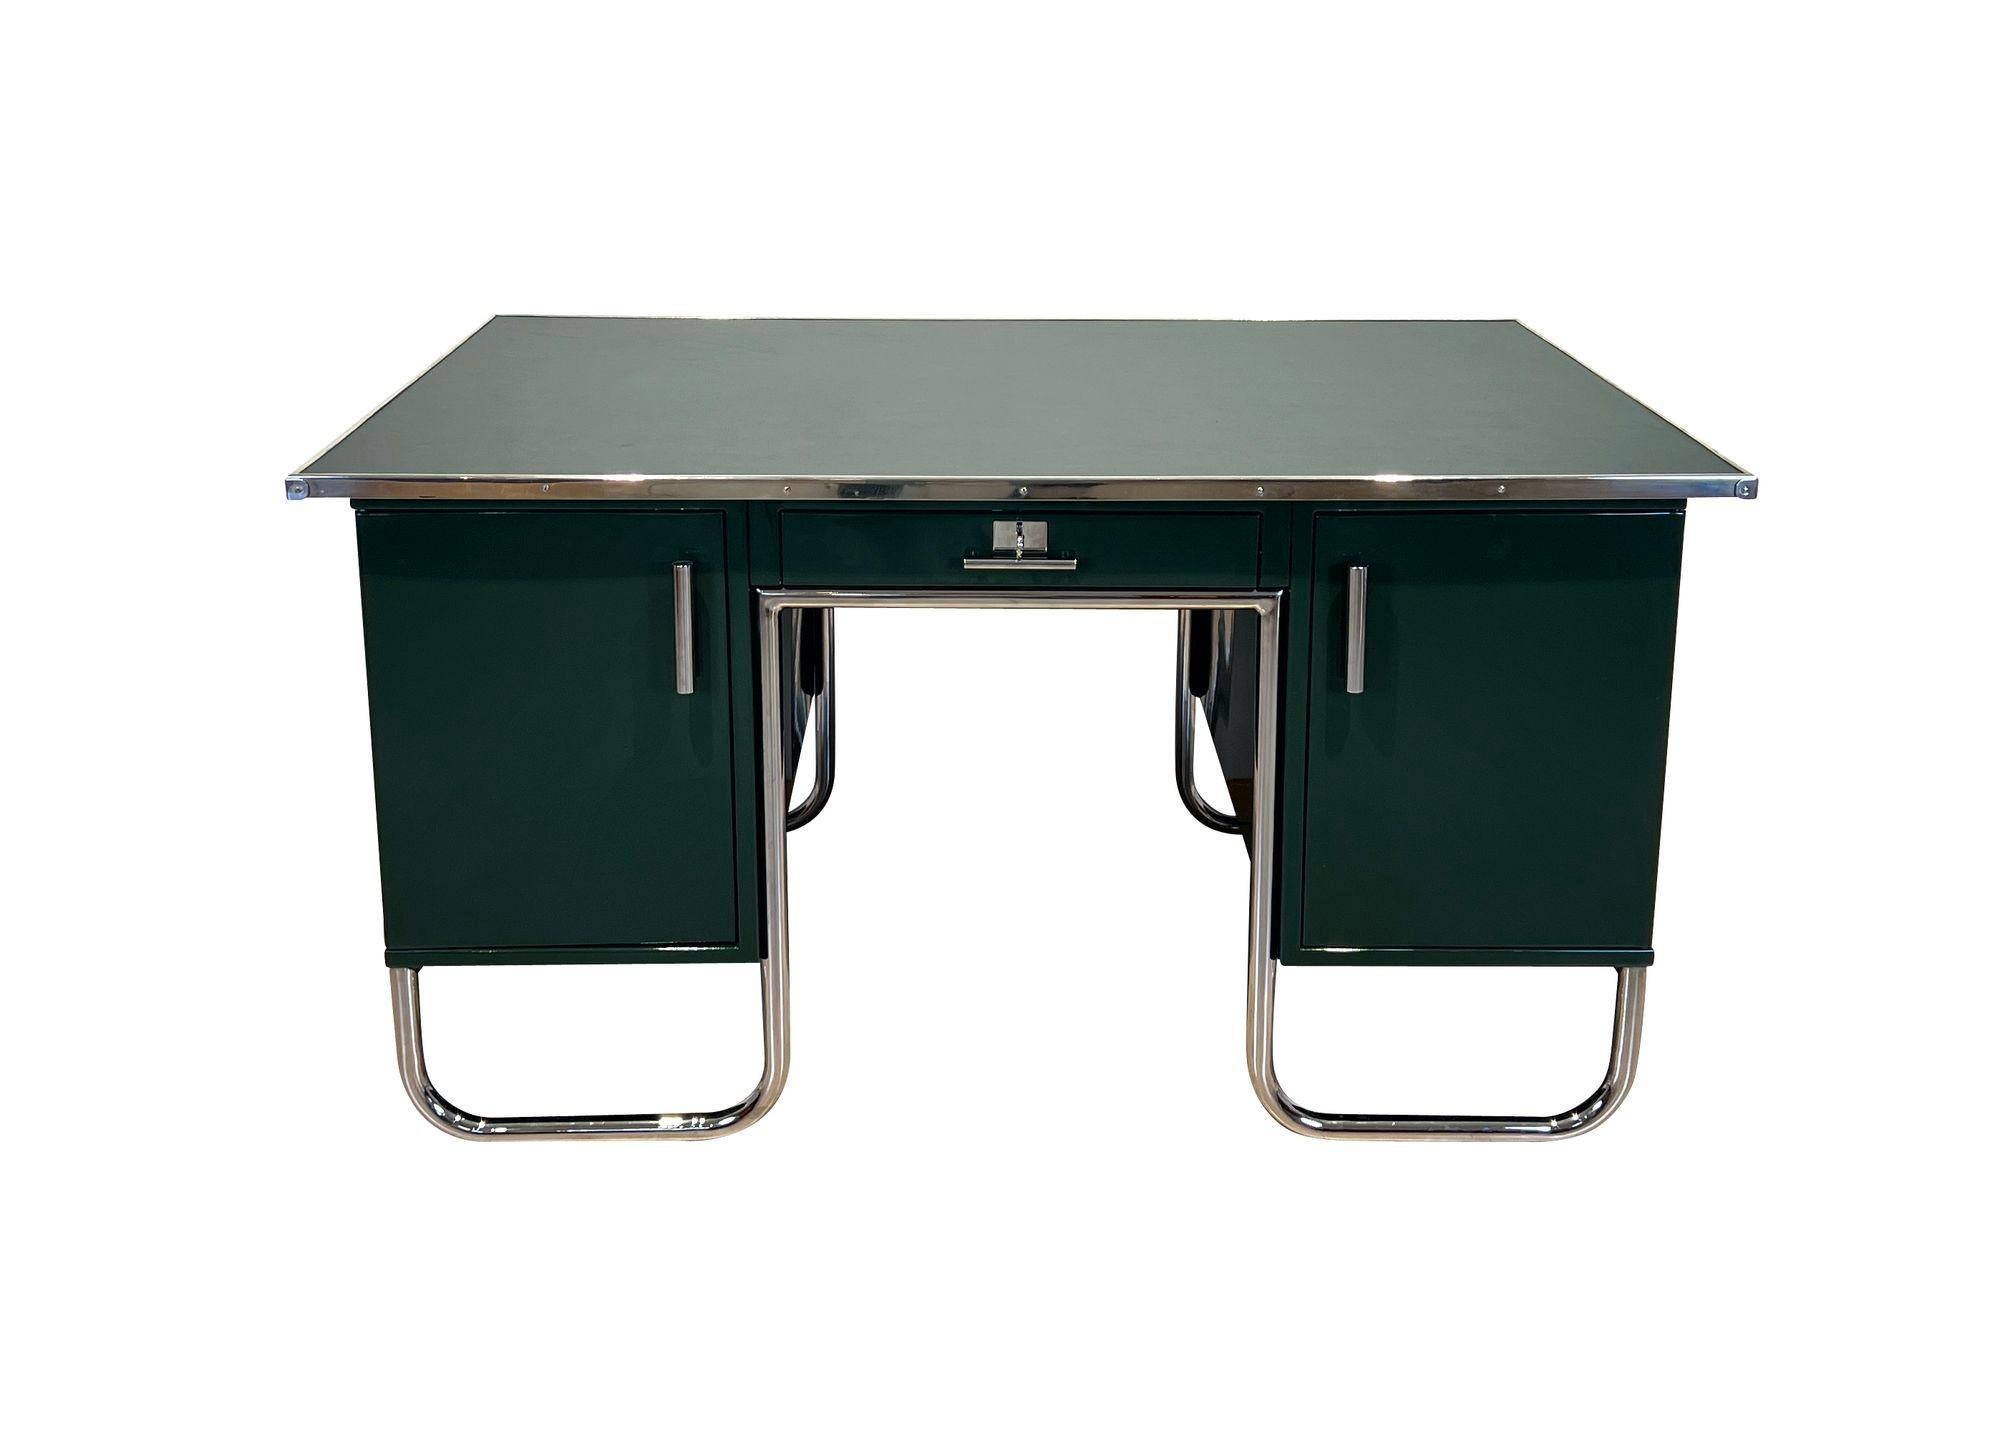 Large Bauhaus “Partners desk” (usable from two sides) from Germany around 1930
High gloss lacquered in the original green color (British Racing Green).
Polished steel tube and partly newly nickel-plated. Each side with 2 doors and 1 drawer.
Old